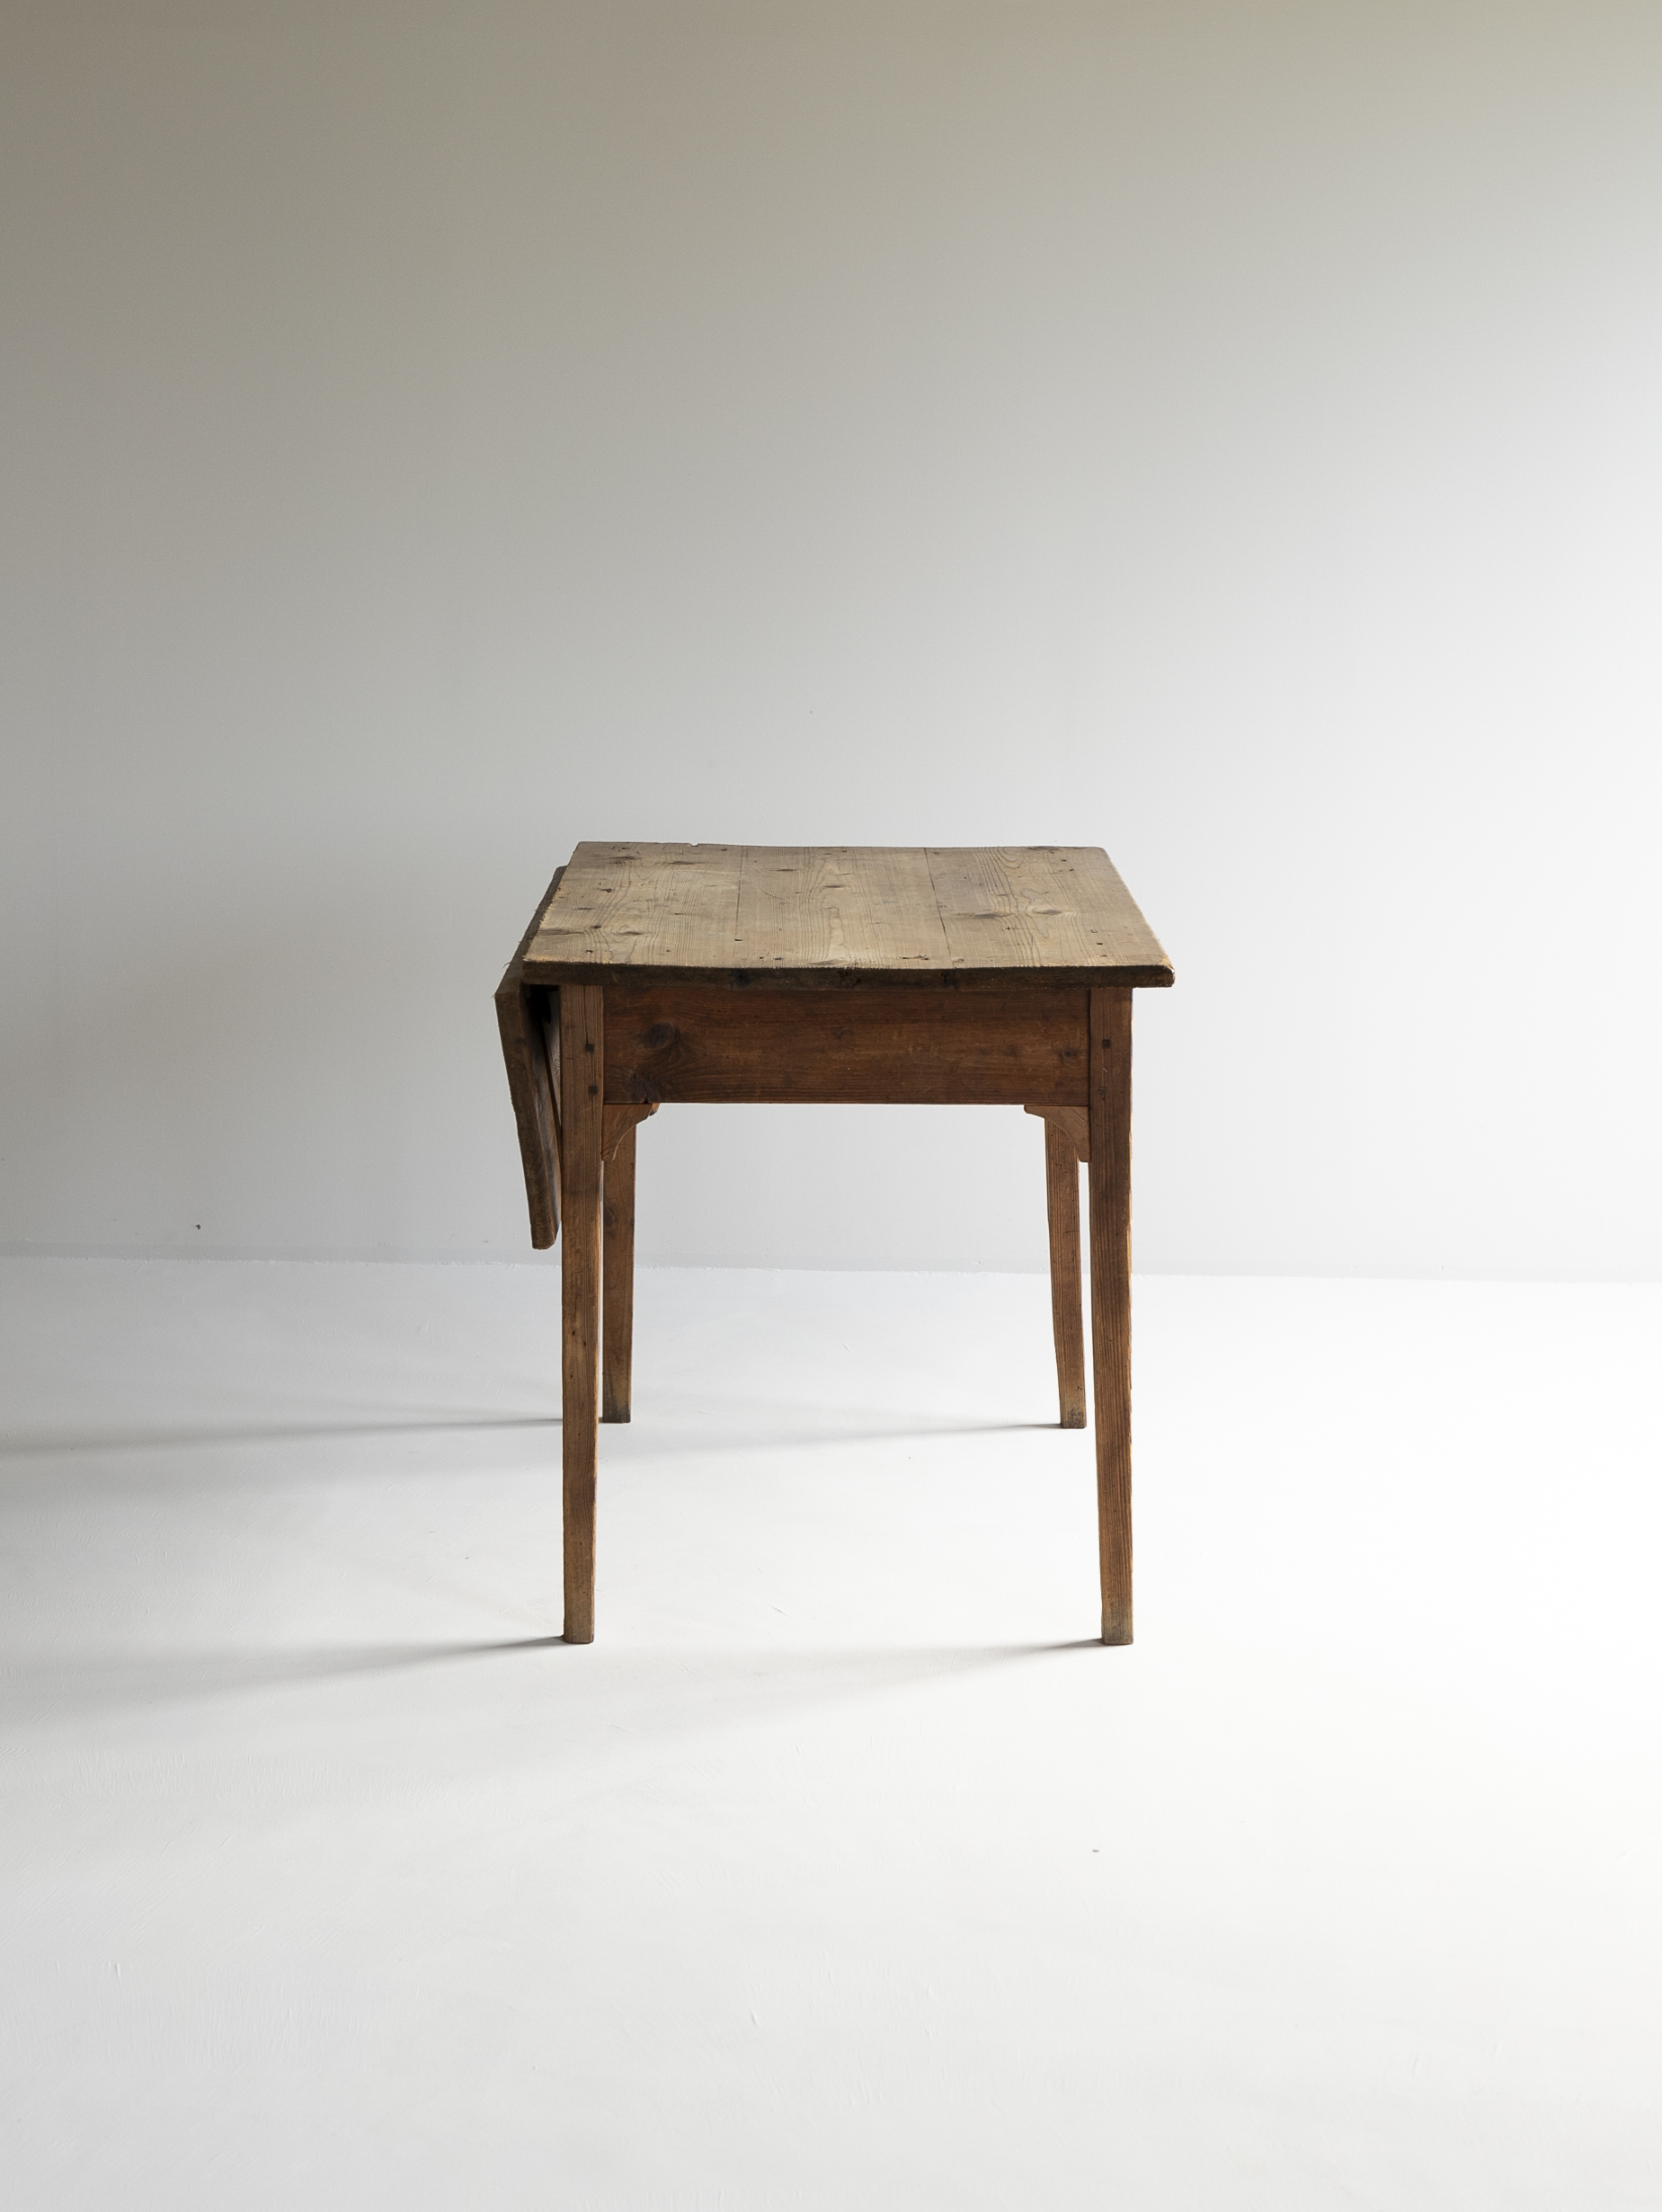 Antique Farm butterfly Table l アンティークバタフライテーブル